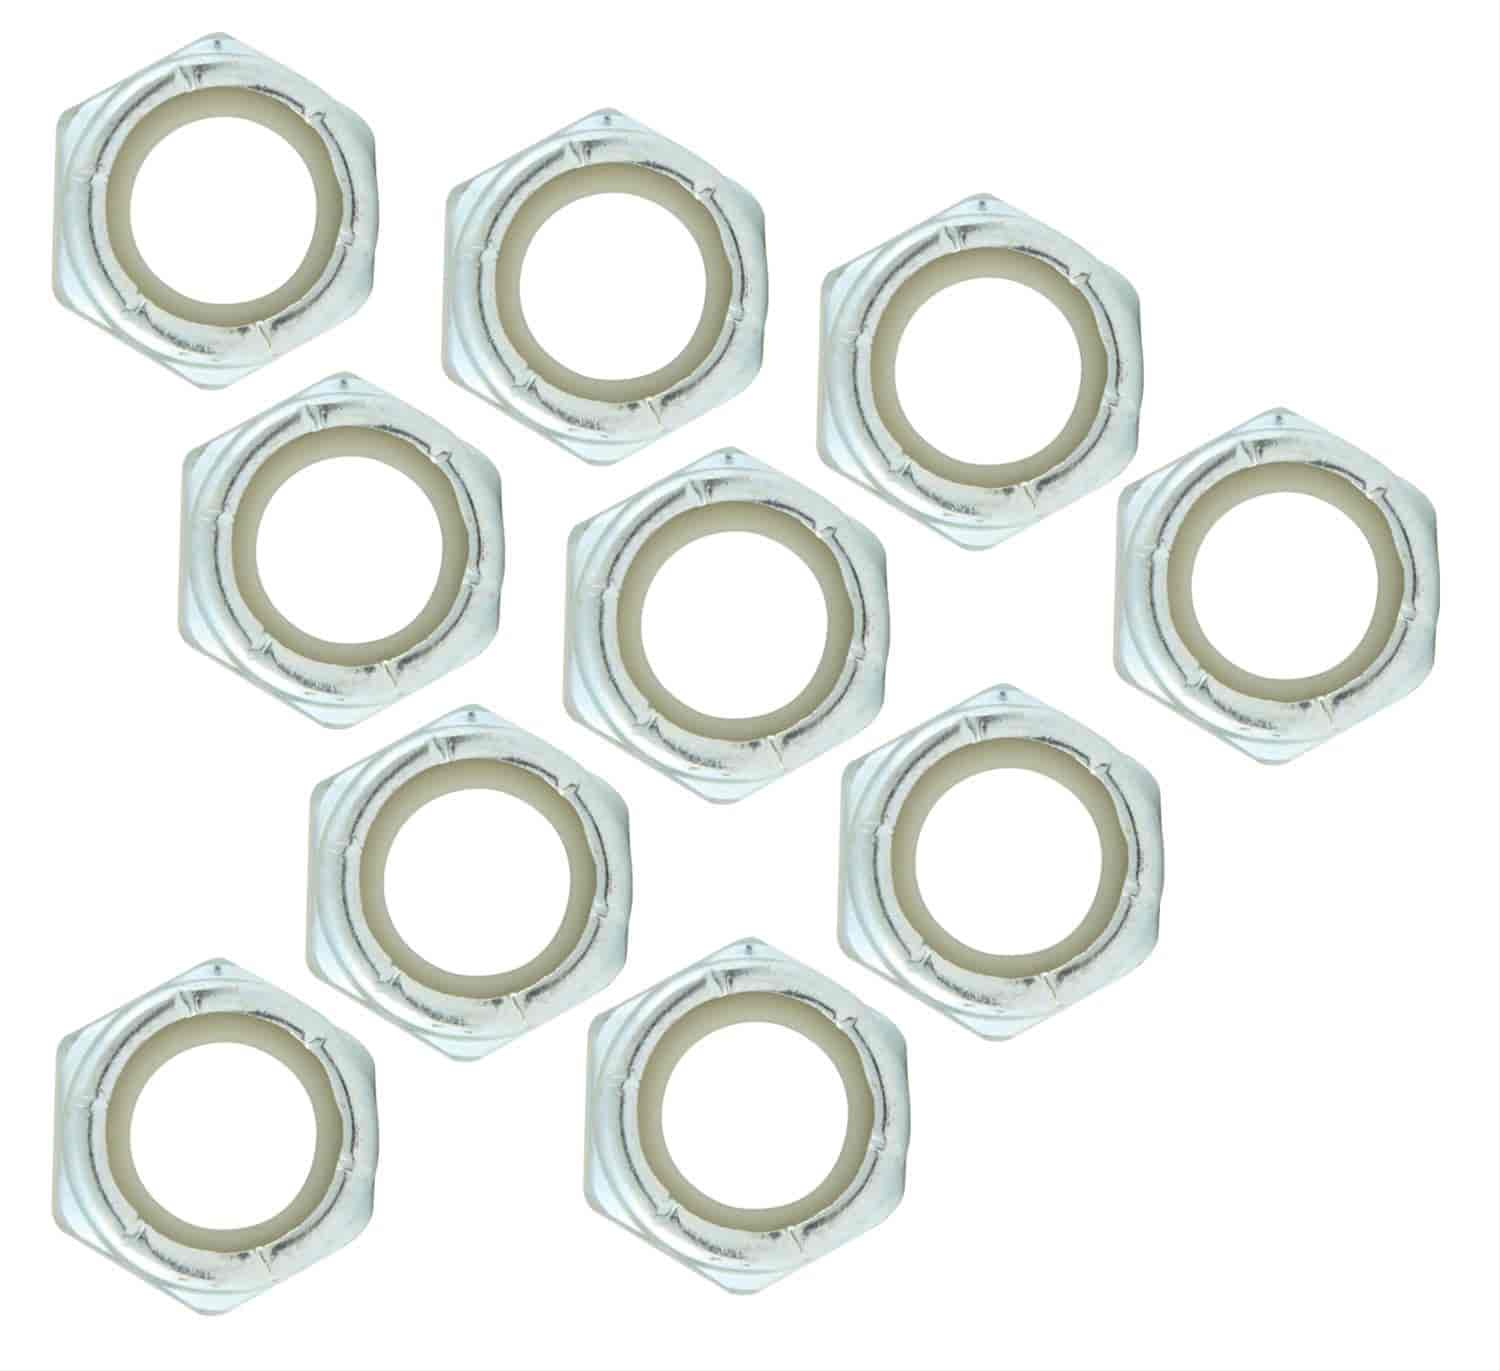 Coarse Thread Hex Nuts Thin With Nylon Inserts